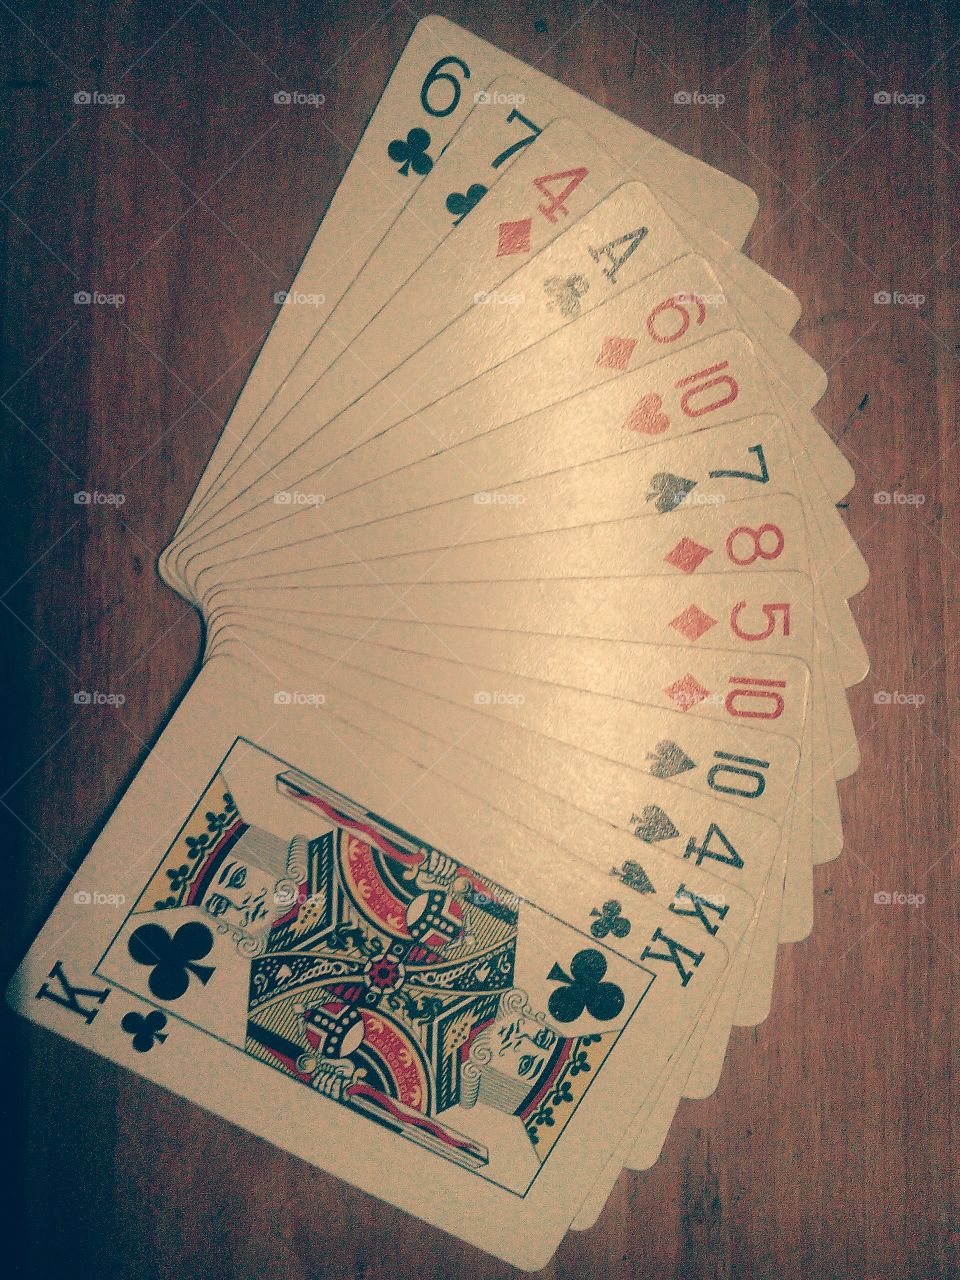 cards. this is famous game generally called as cards.it has many games inside it called rummy,etc